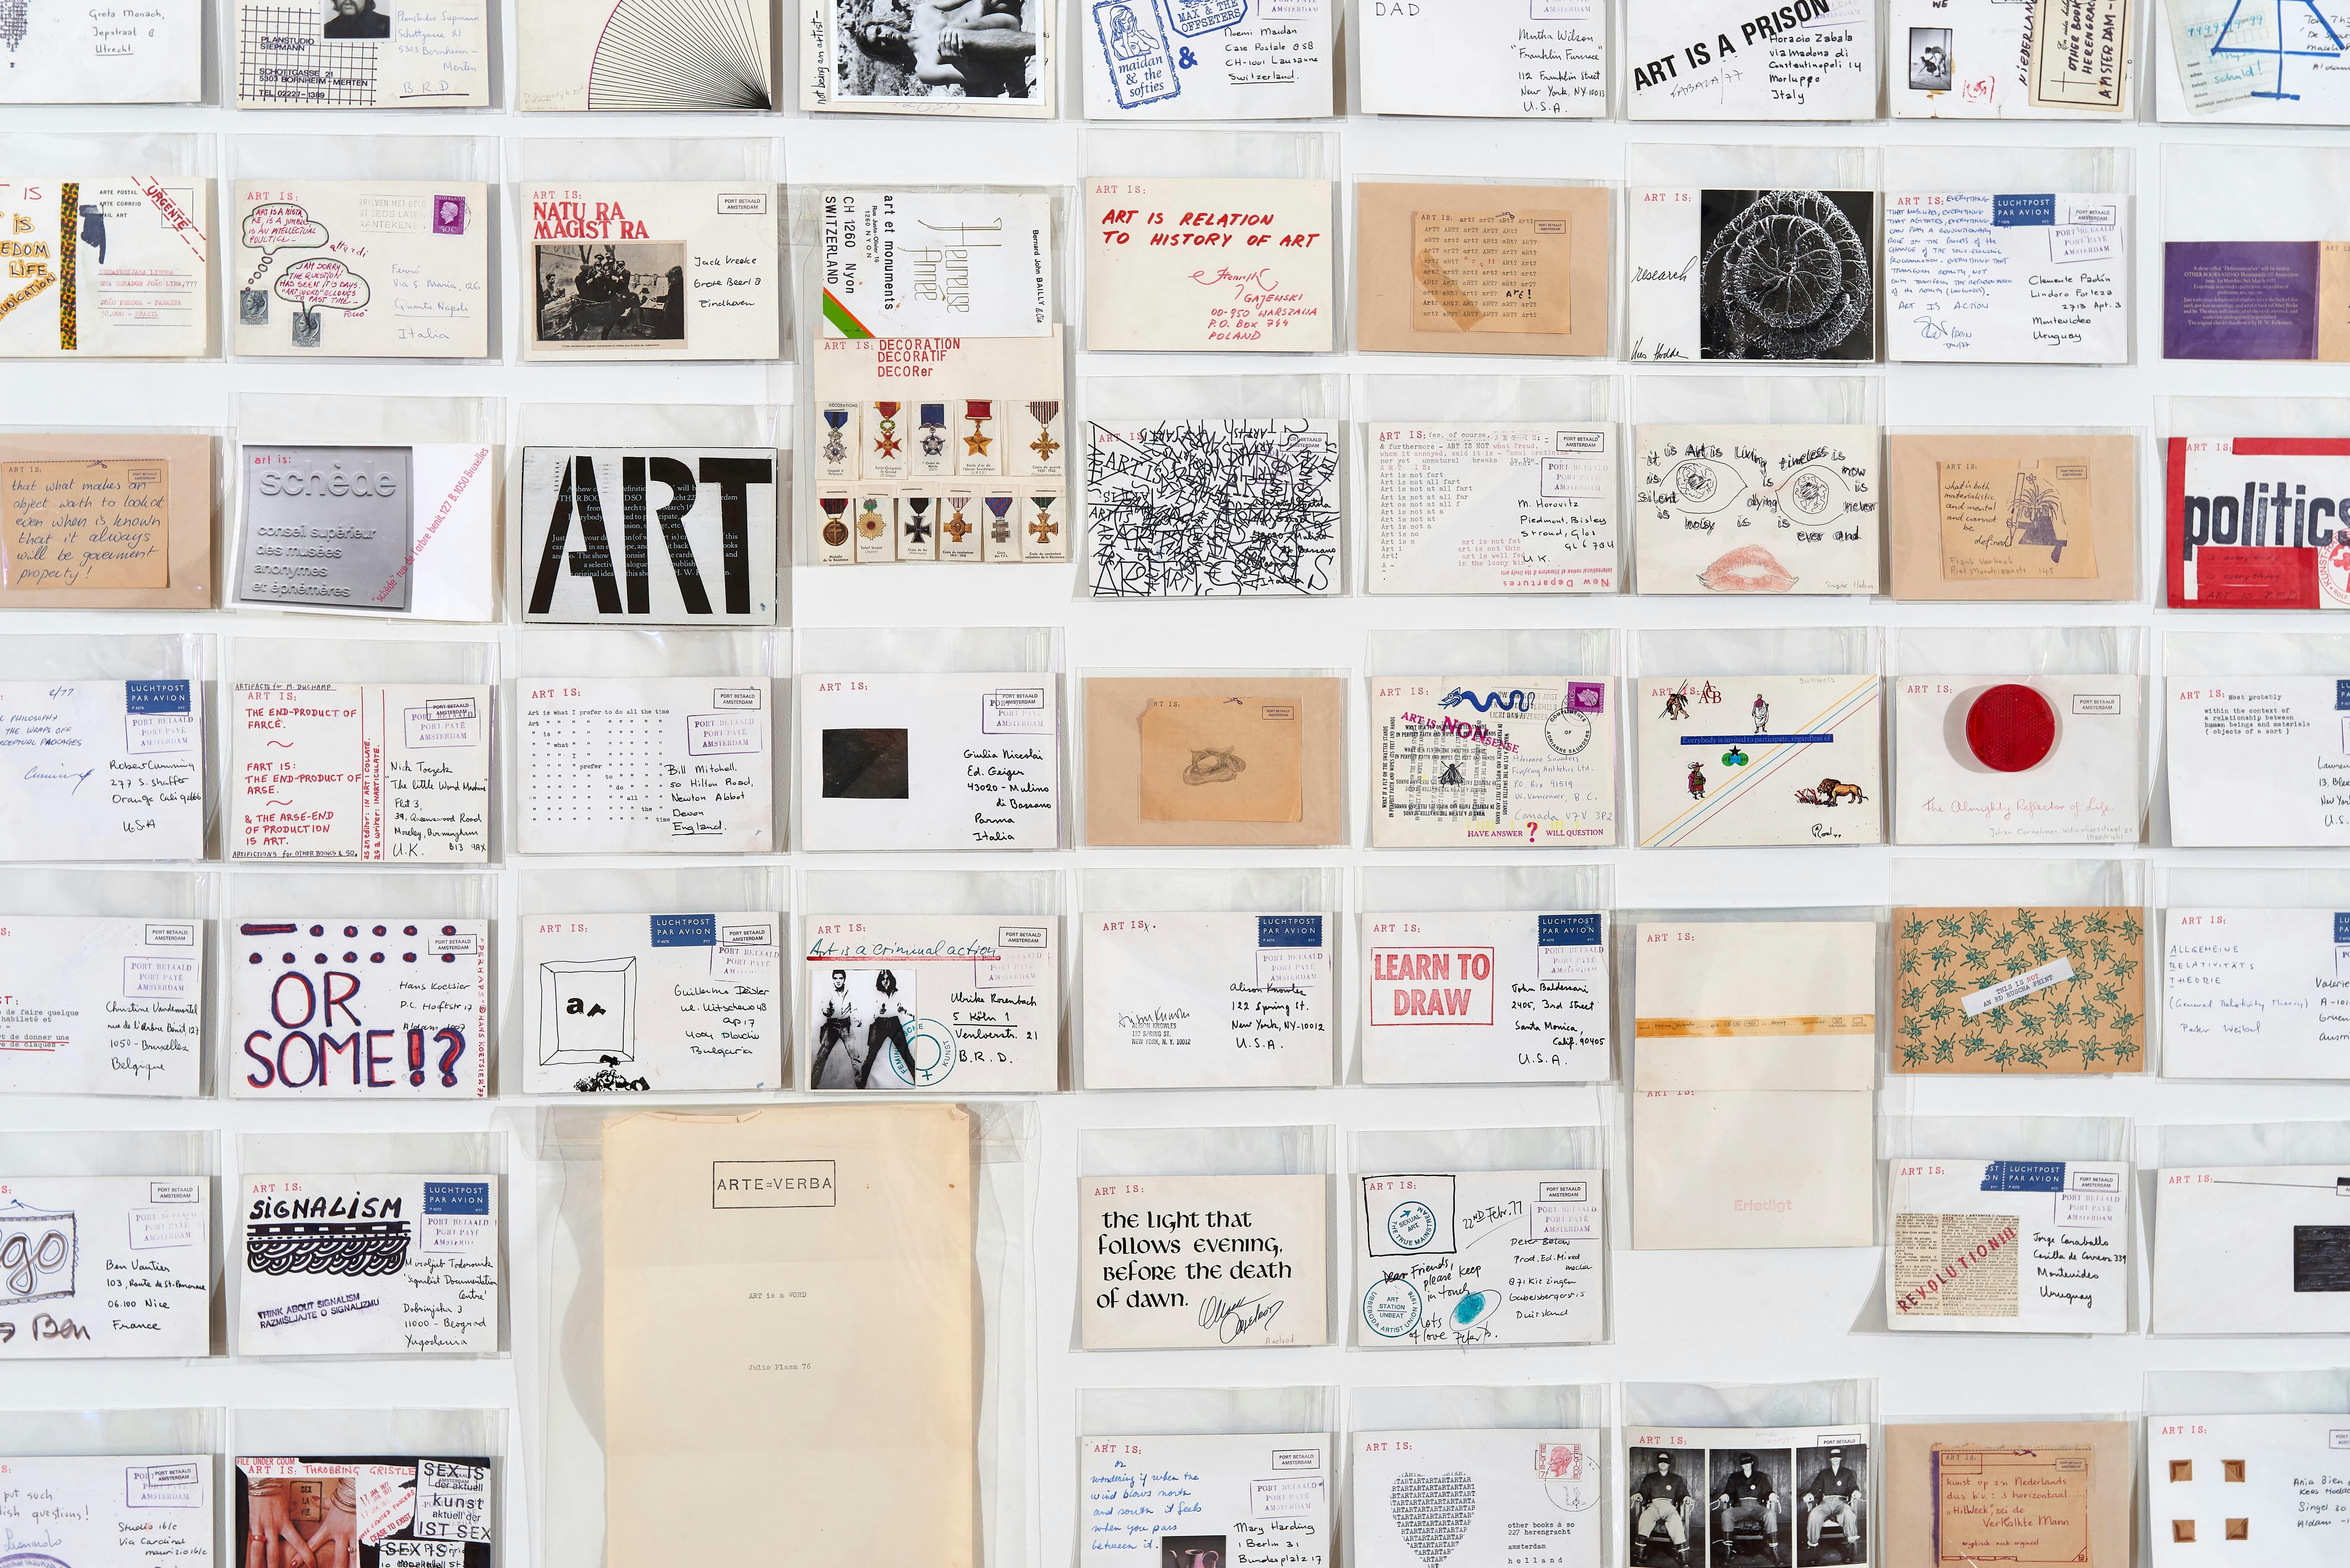 Installation view of Ulises Carrión exhibition showing small collages of varying size, envelopes, photographs, and sketches mounted in a grid to a wall.